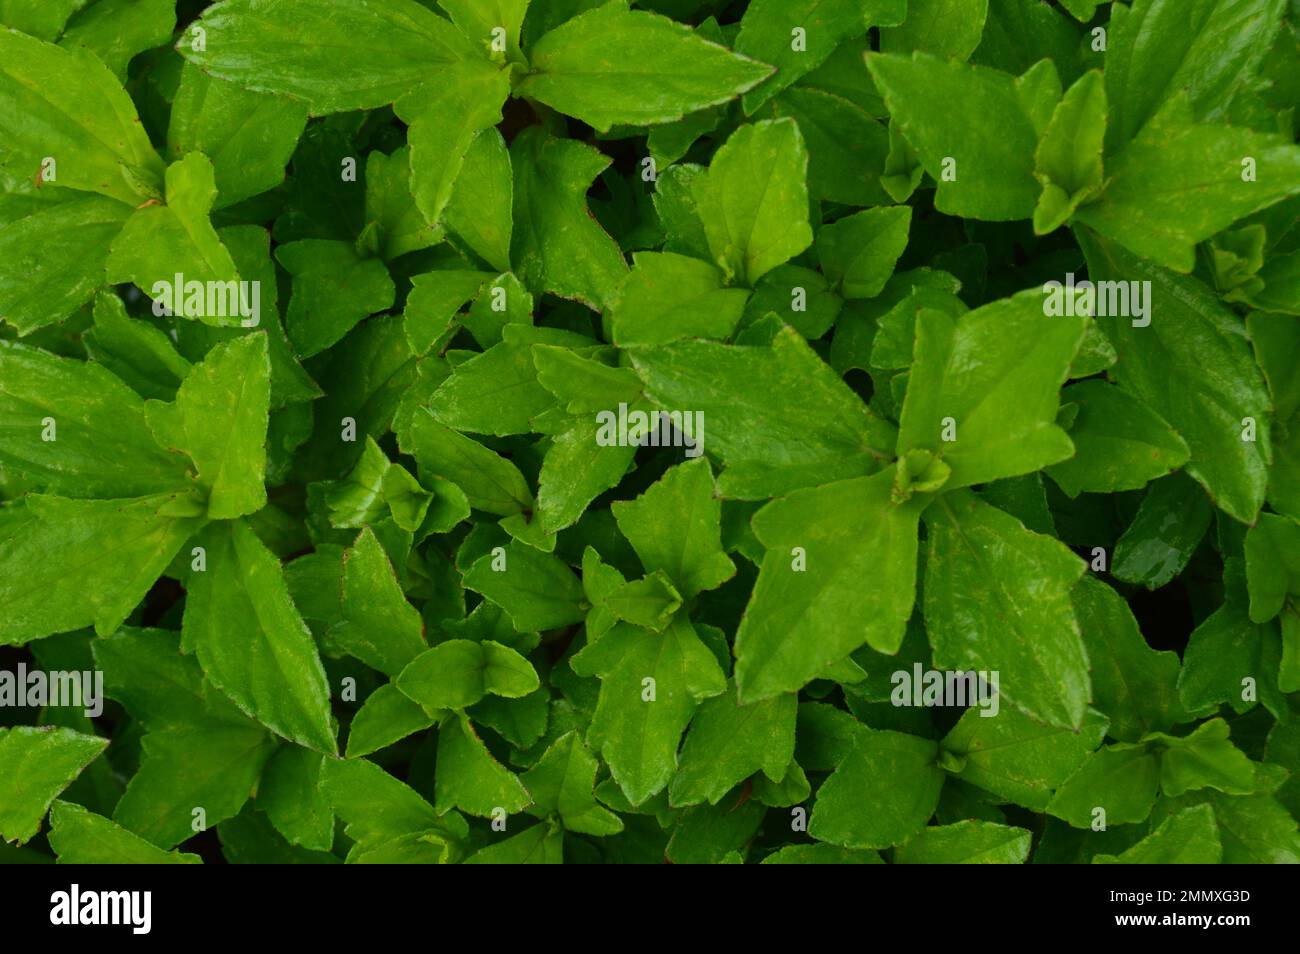 Portrait of the bright green leaves of the Wedelia Flower from various angles. Stock Photo